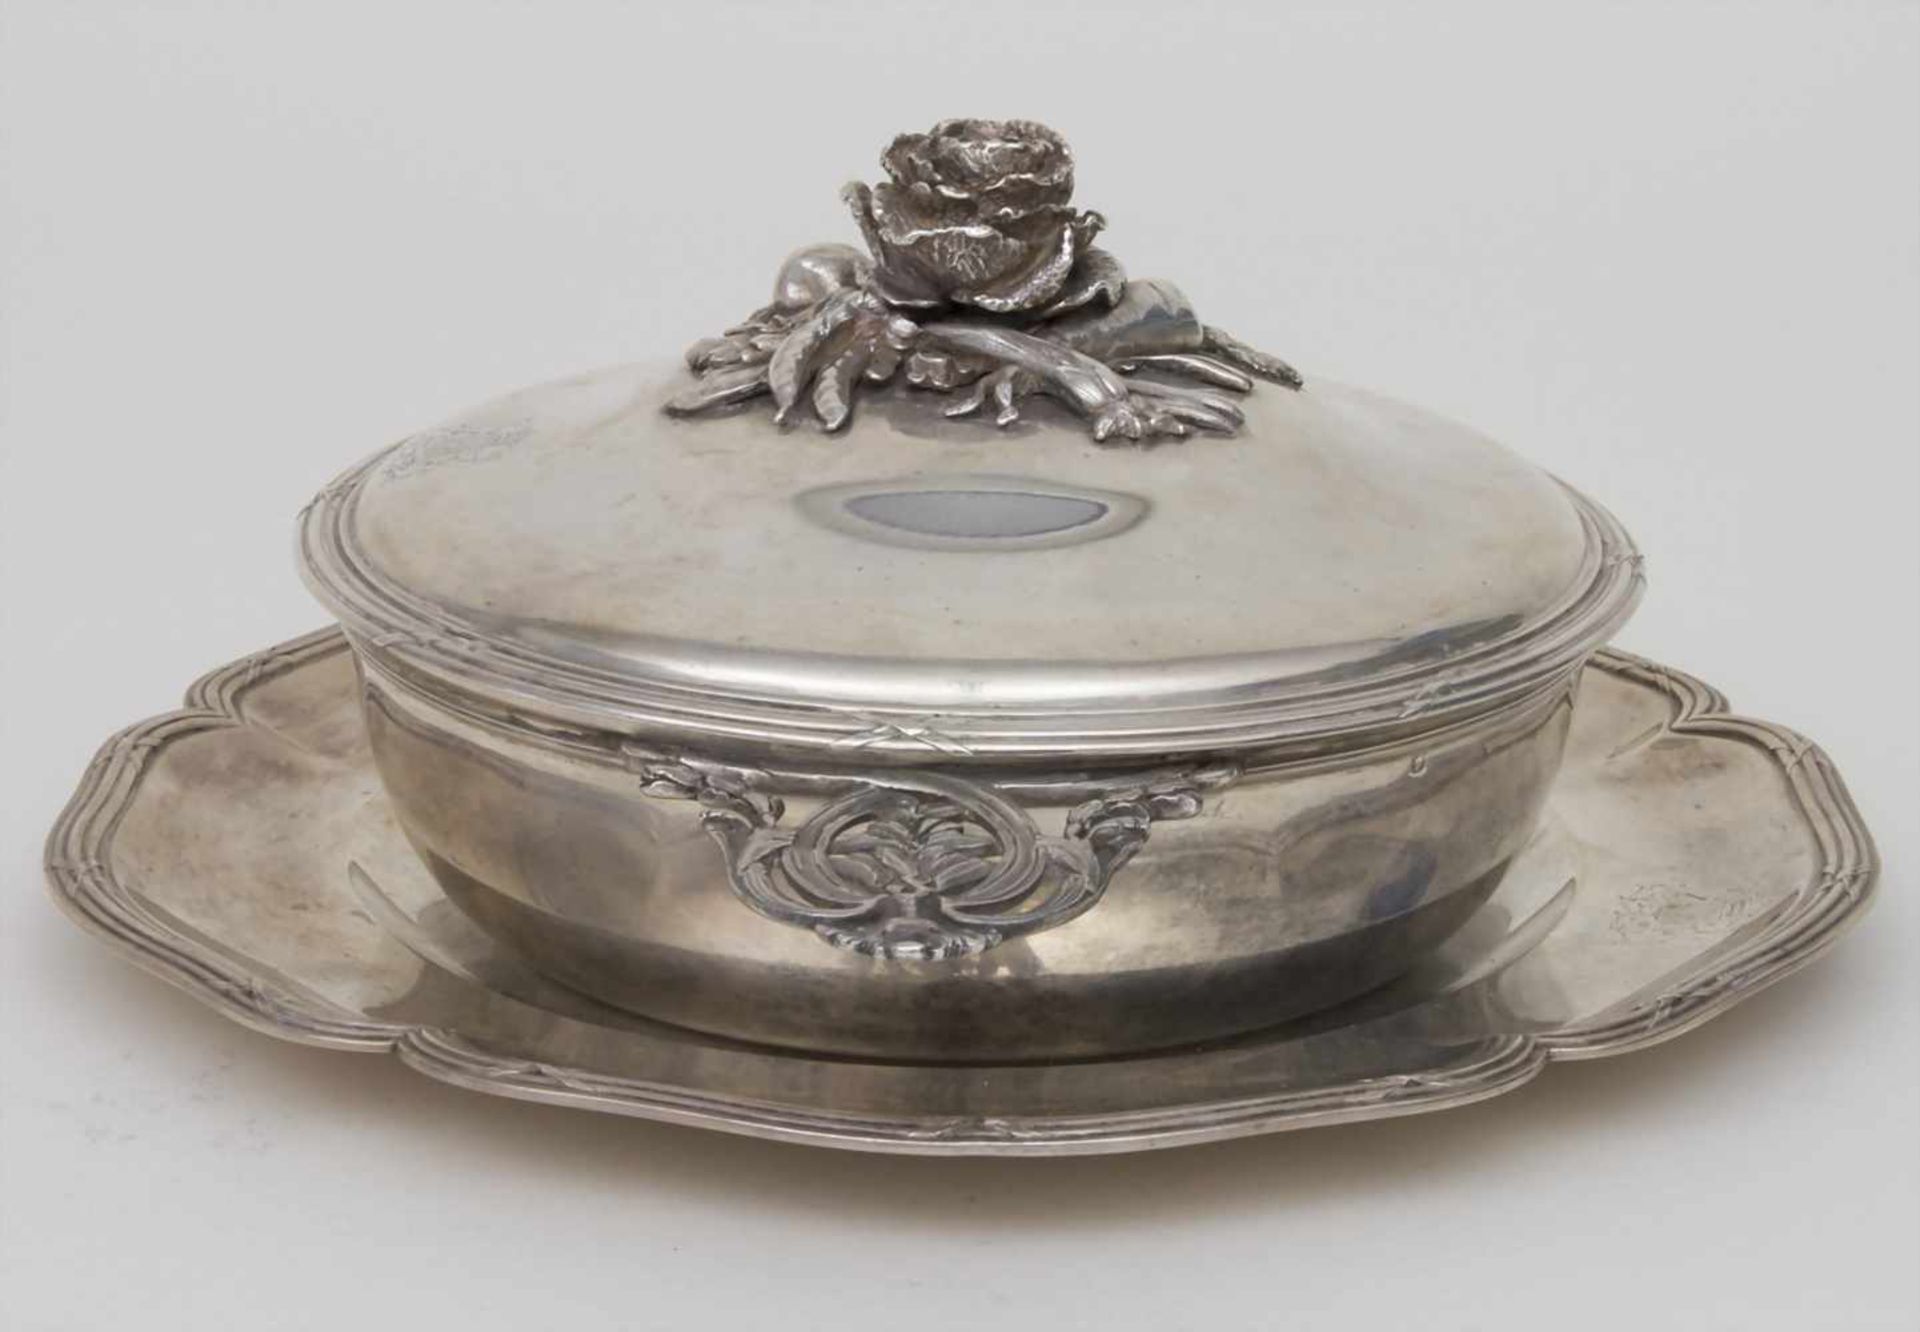 Legumier / Wöchnerinnenschüssel / A silver vegetable tureen with lining and cover, Stanislas Pollet, - Image 2 of 17